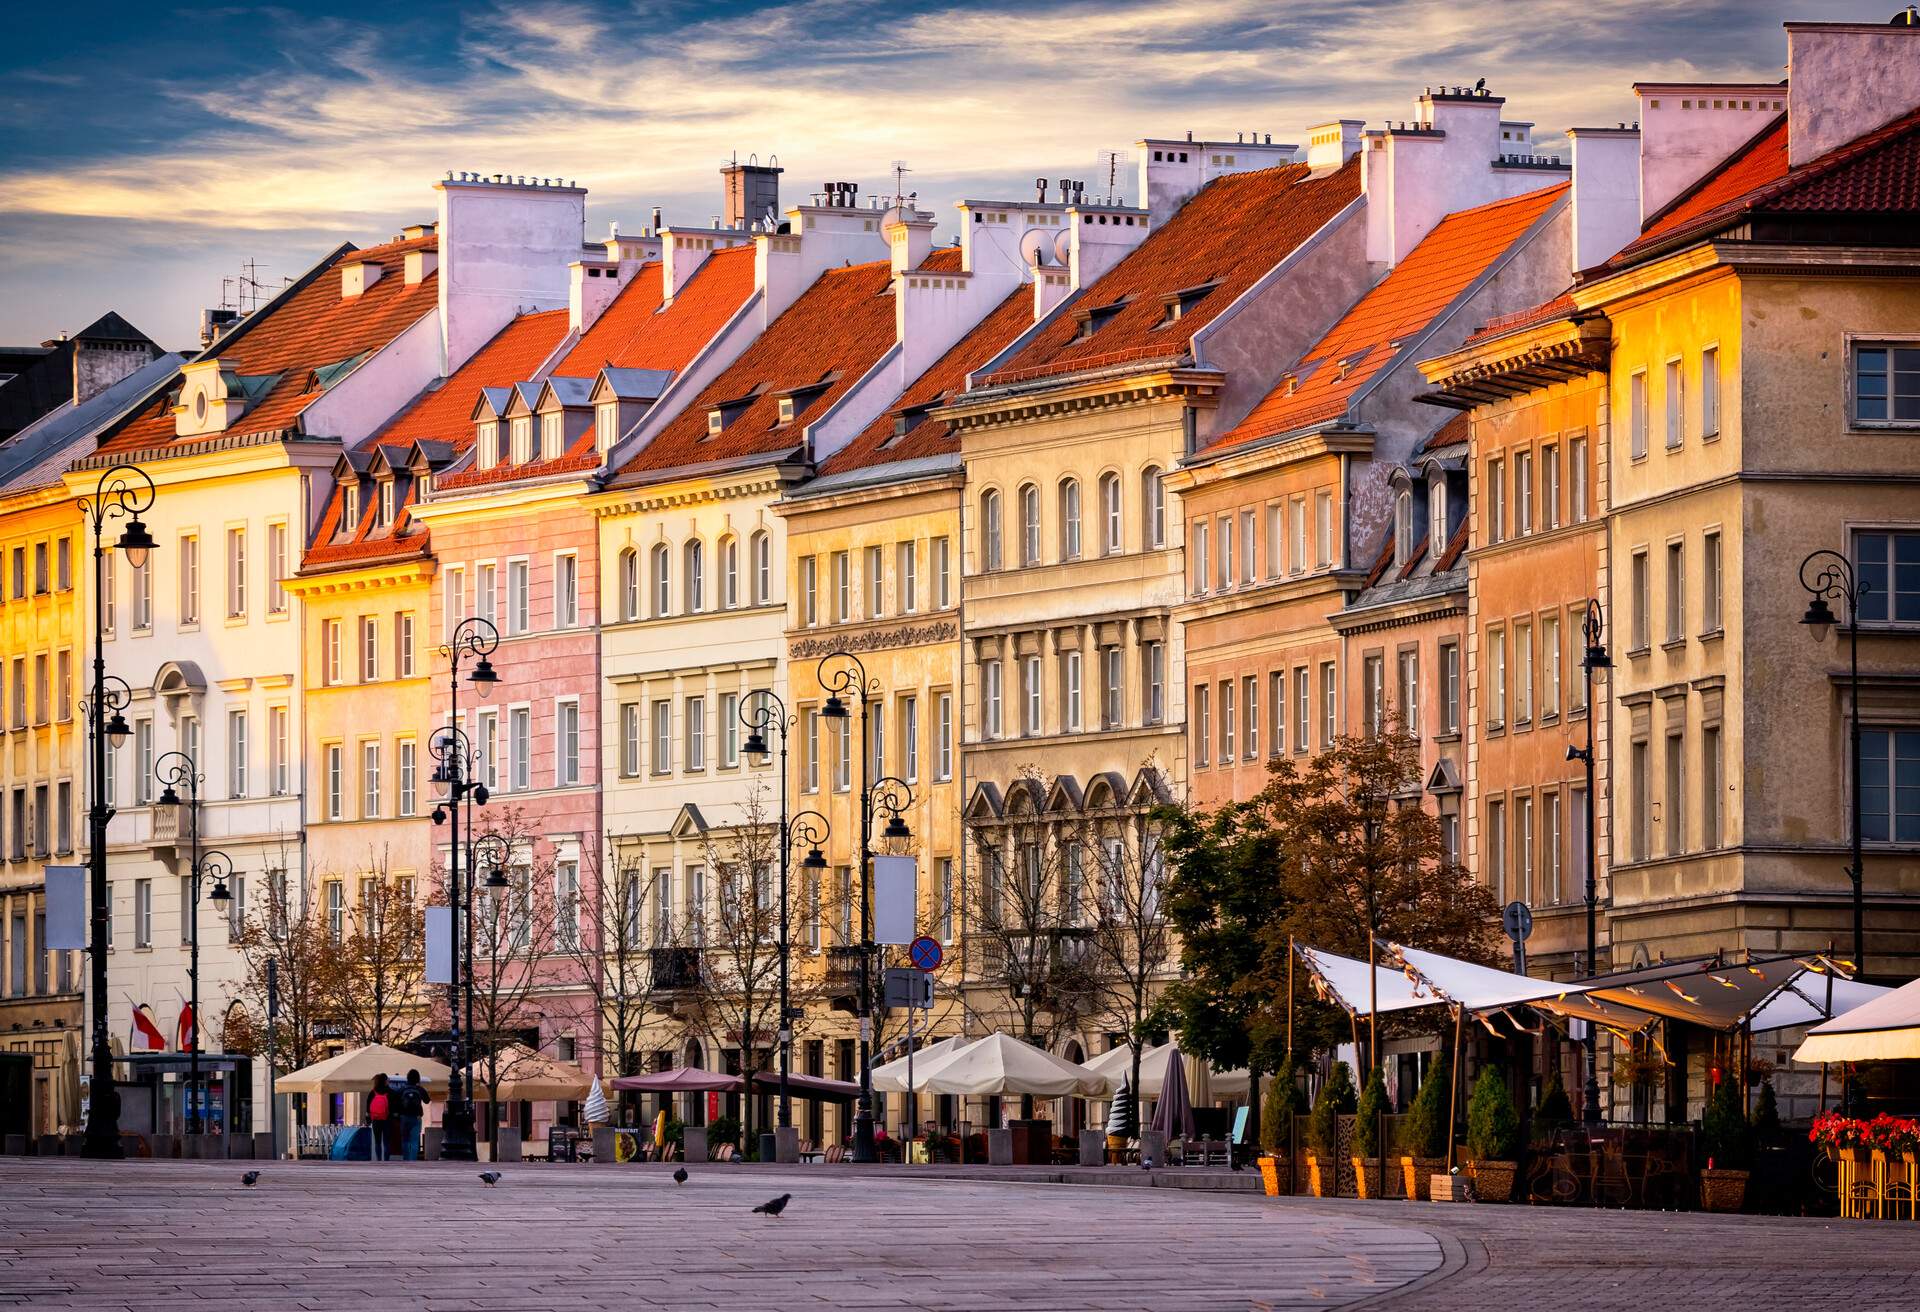 DEST_POLAND_WARSAW_OLD-TOWN_MARKET-SQUARE_GettyImages-1056688702